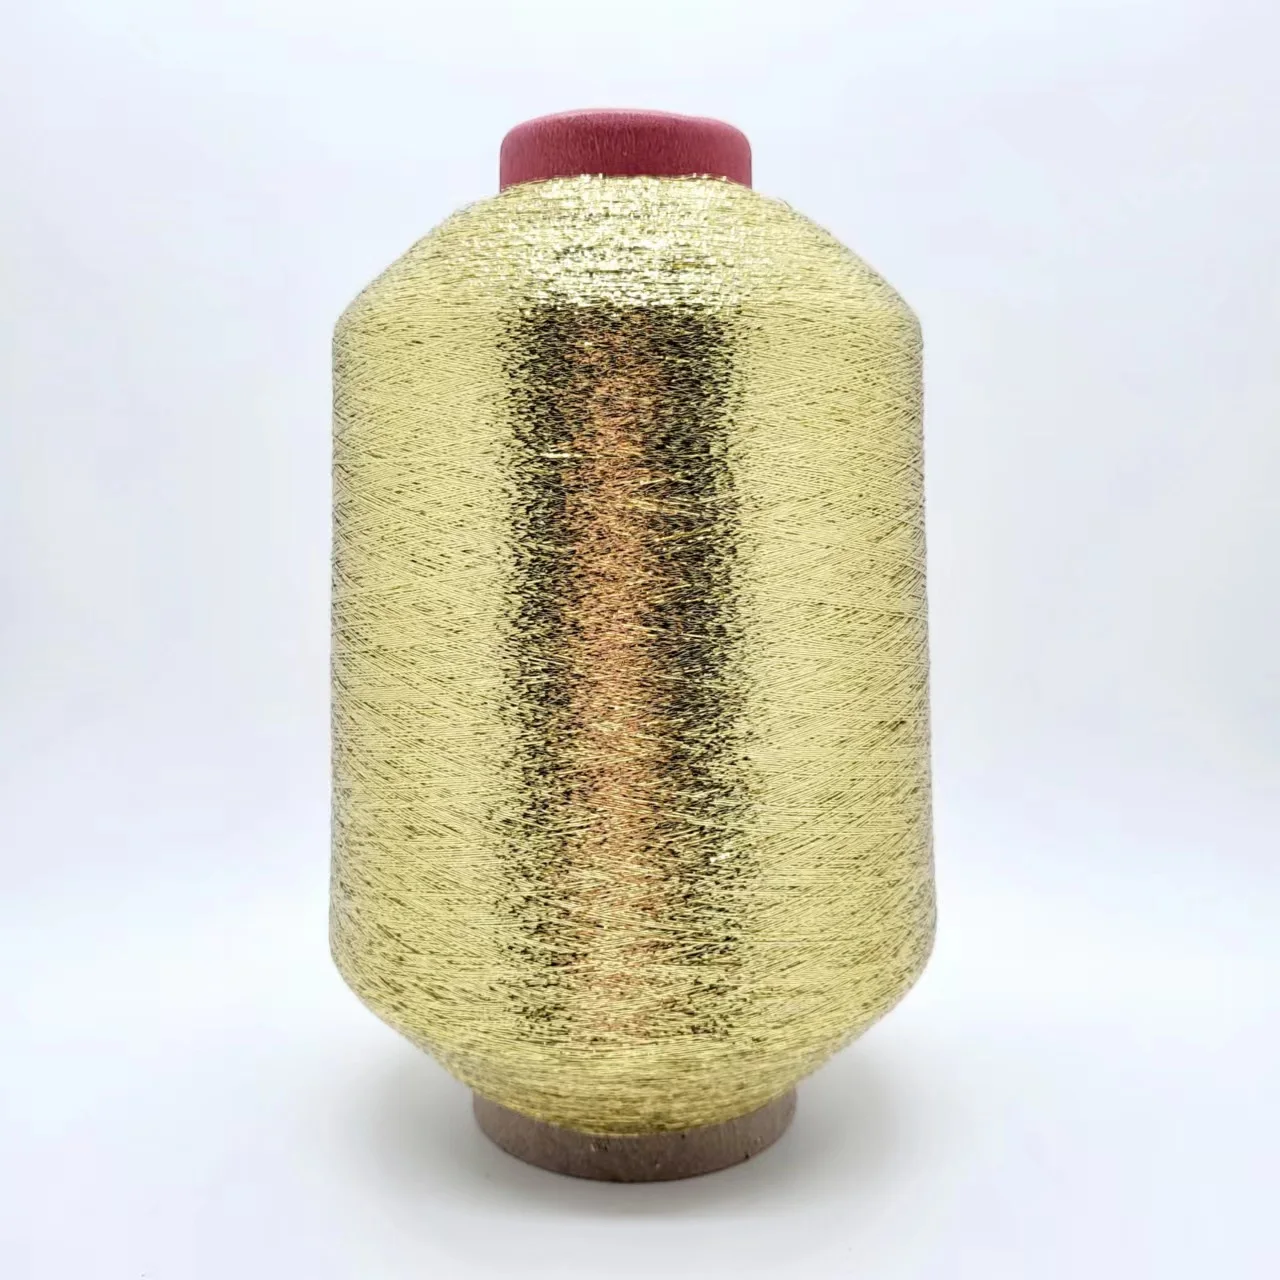 MX Type Polyester Rose Gold Metallic Sparkle Yarn For Textile